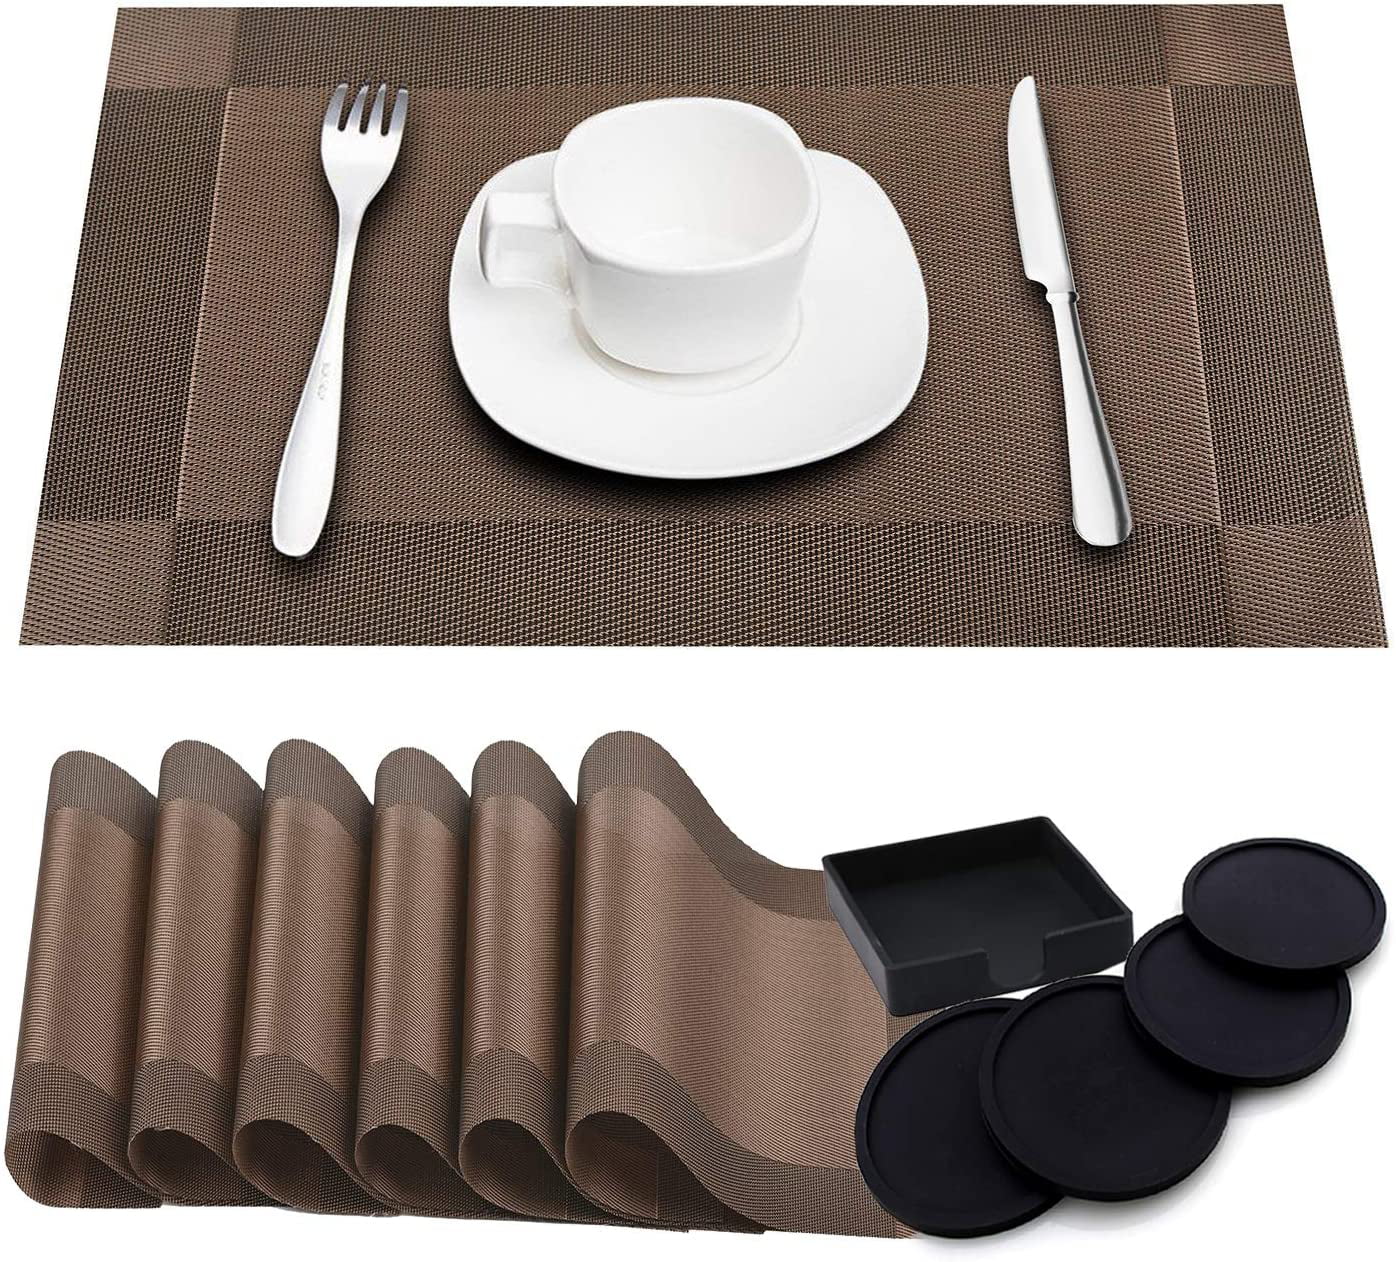 Rectangular Placemat and Square Coaster Set Mirrored 